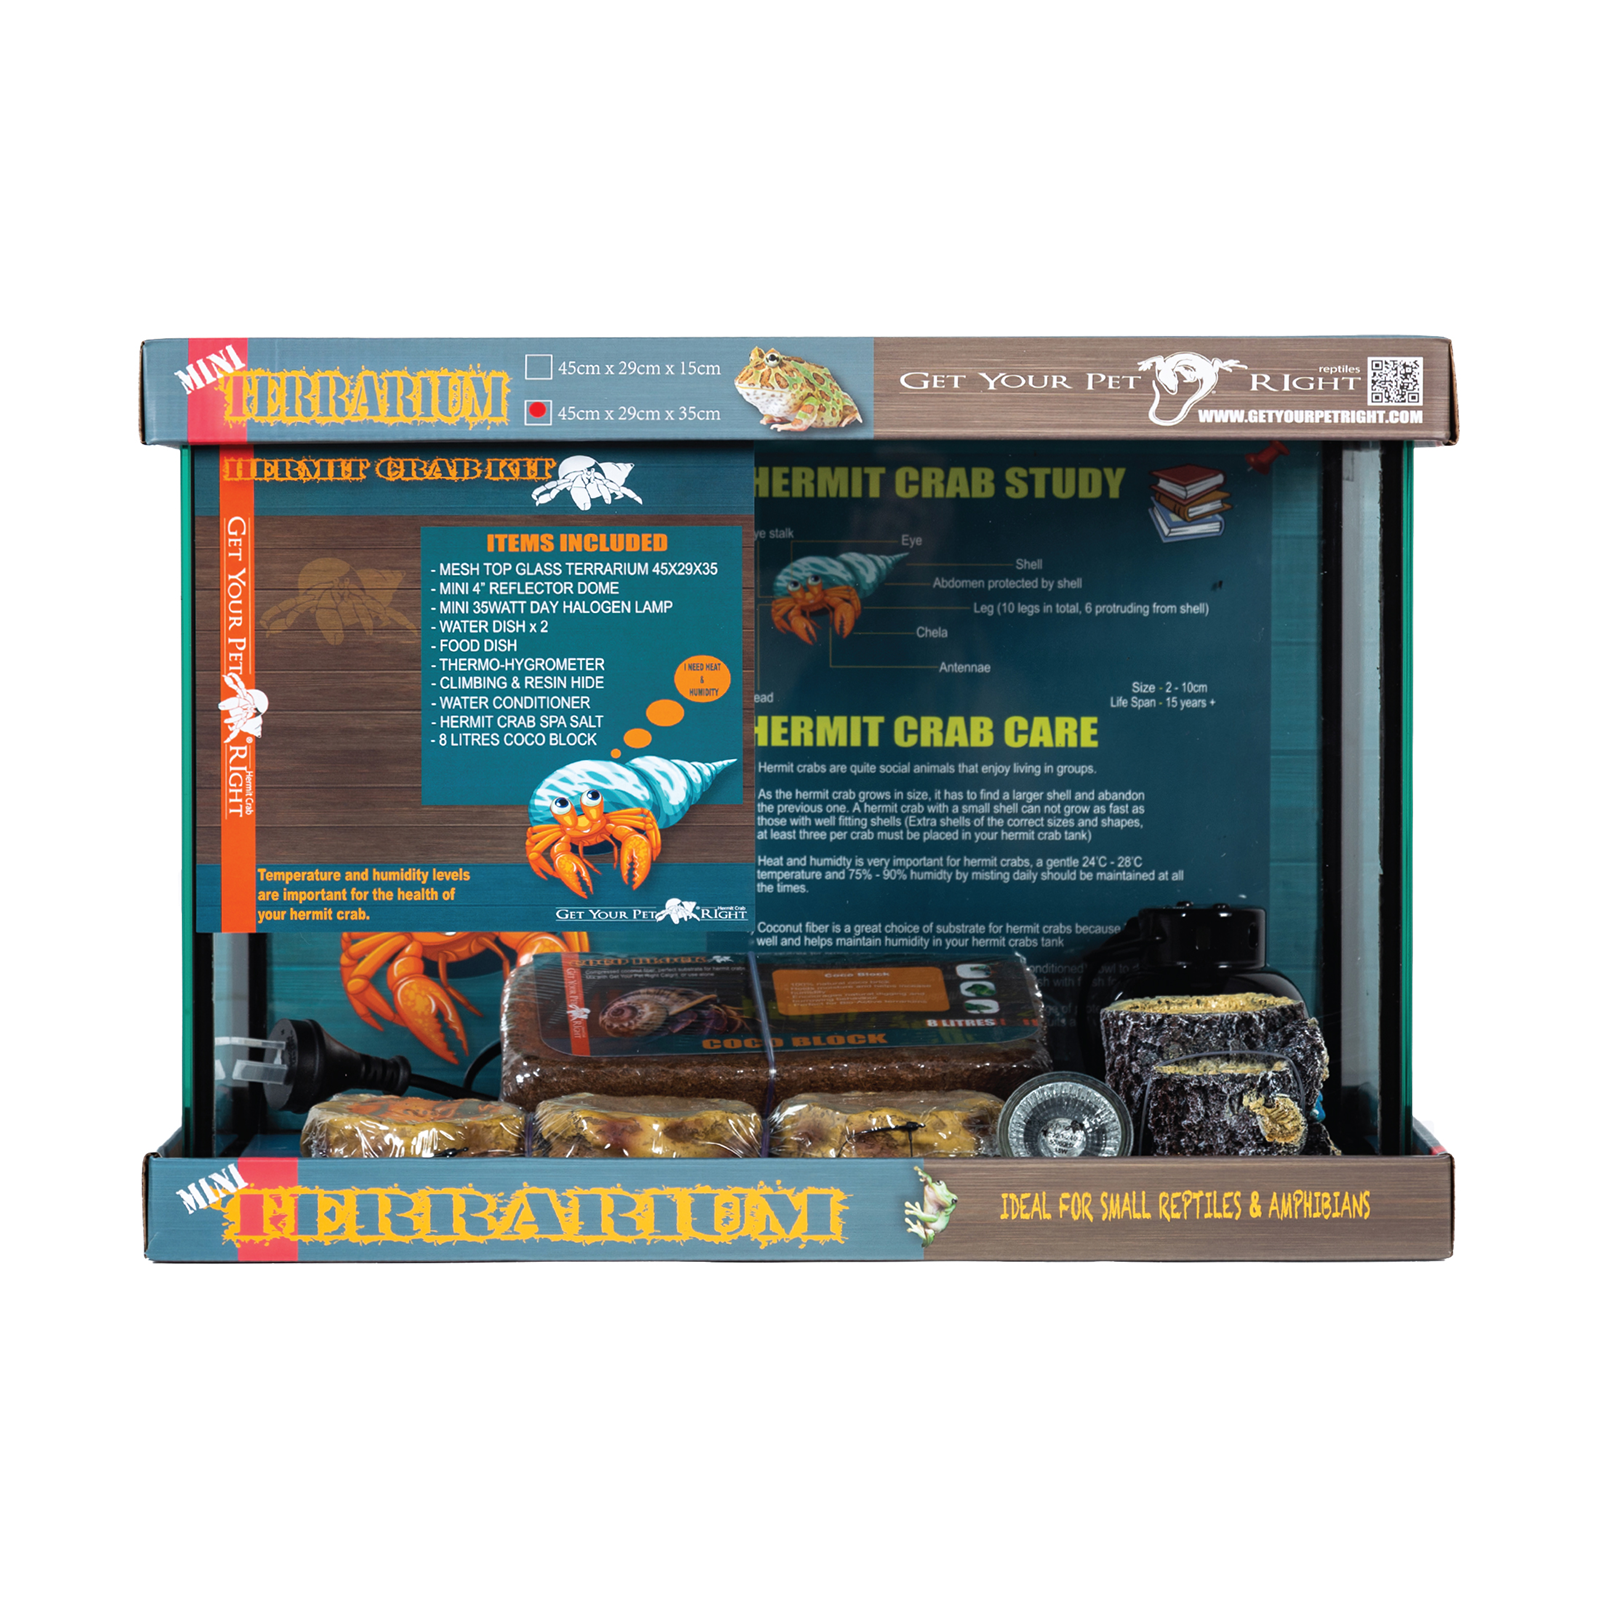 Get Your Pet Right Hermit Crab Kit